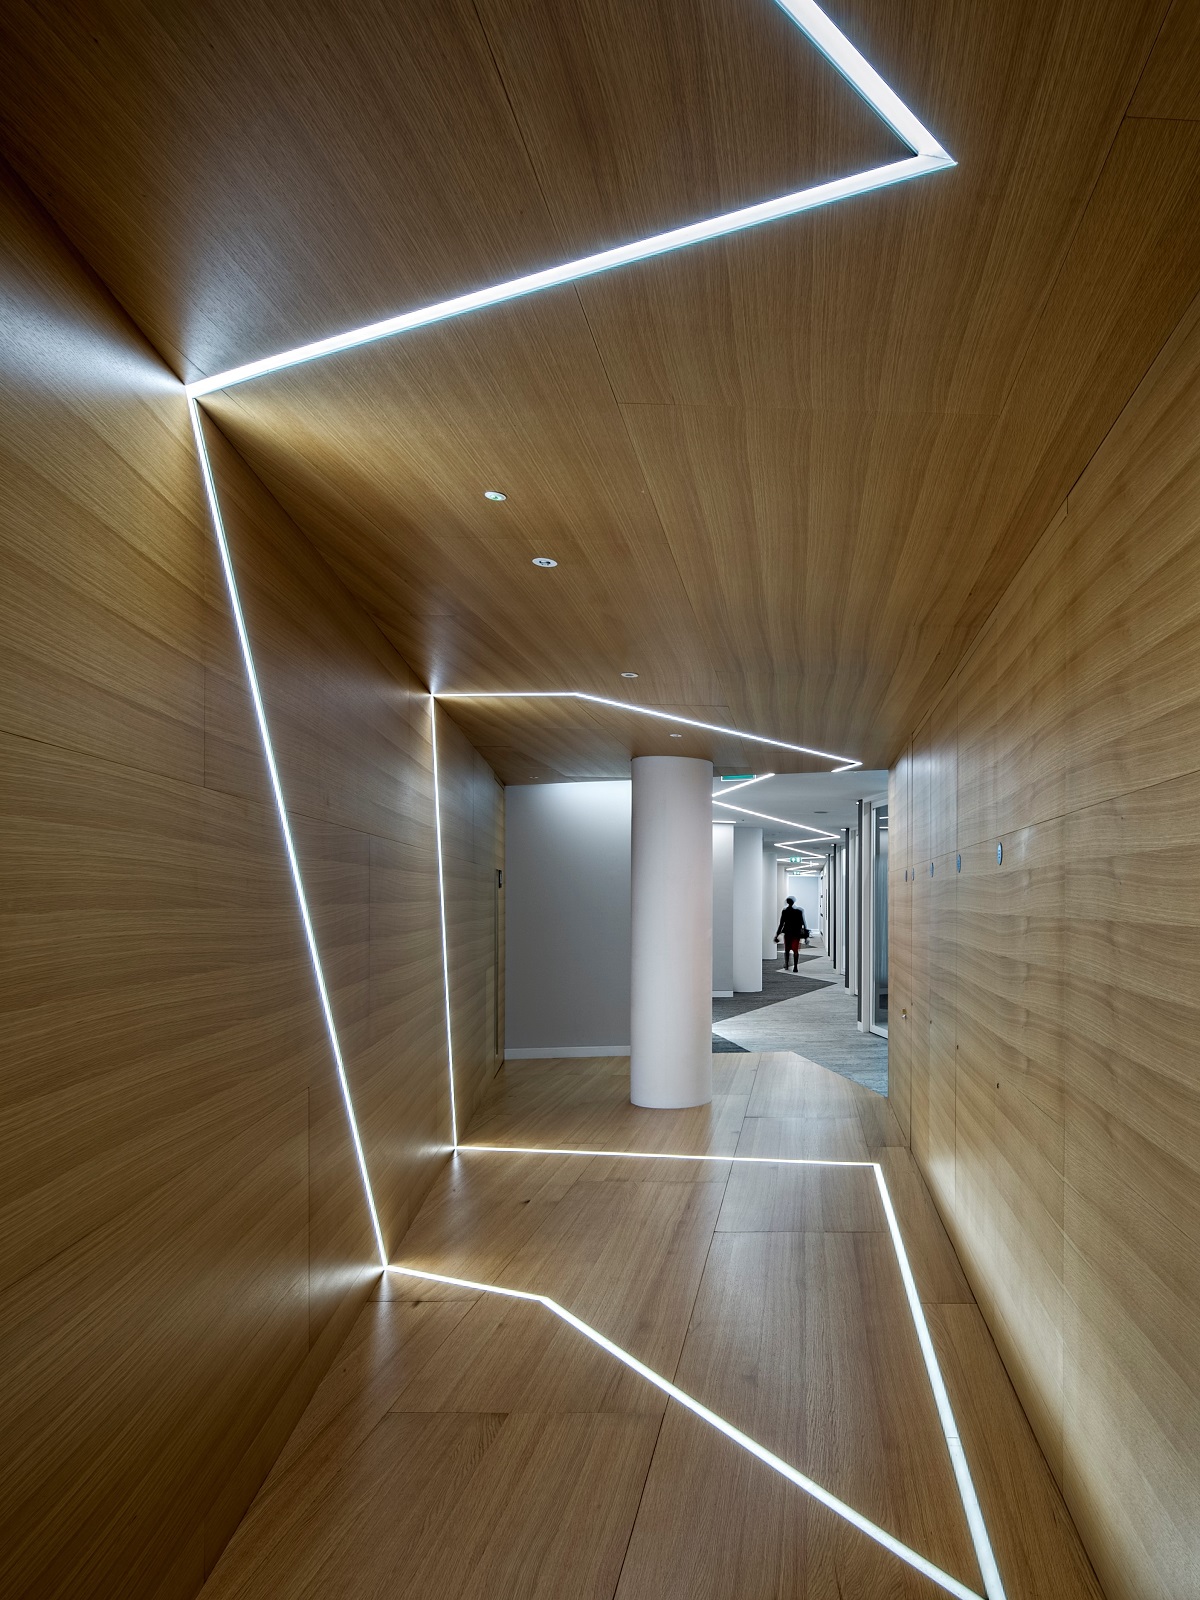 directive and graphic lighting in a passage by elektra lighting design